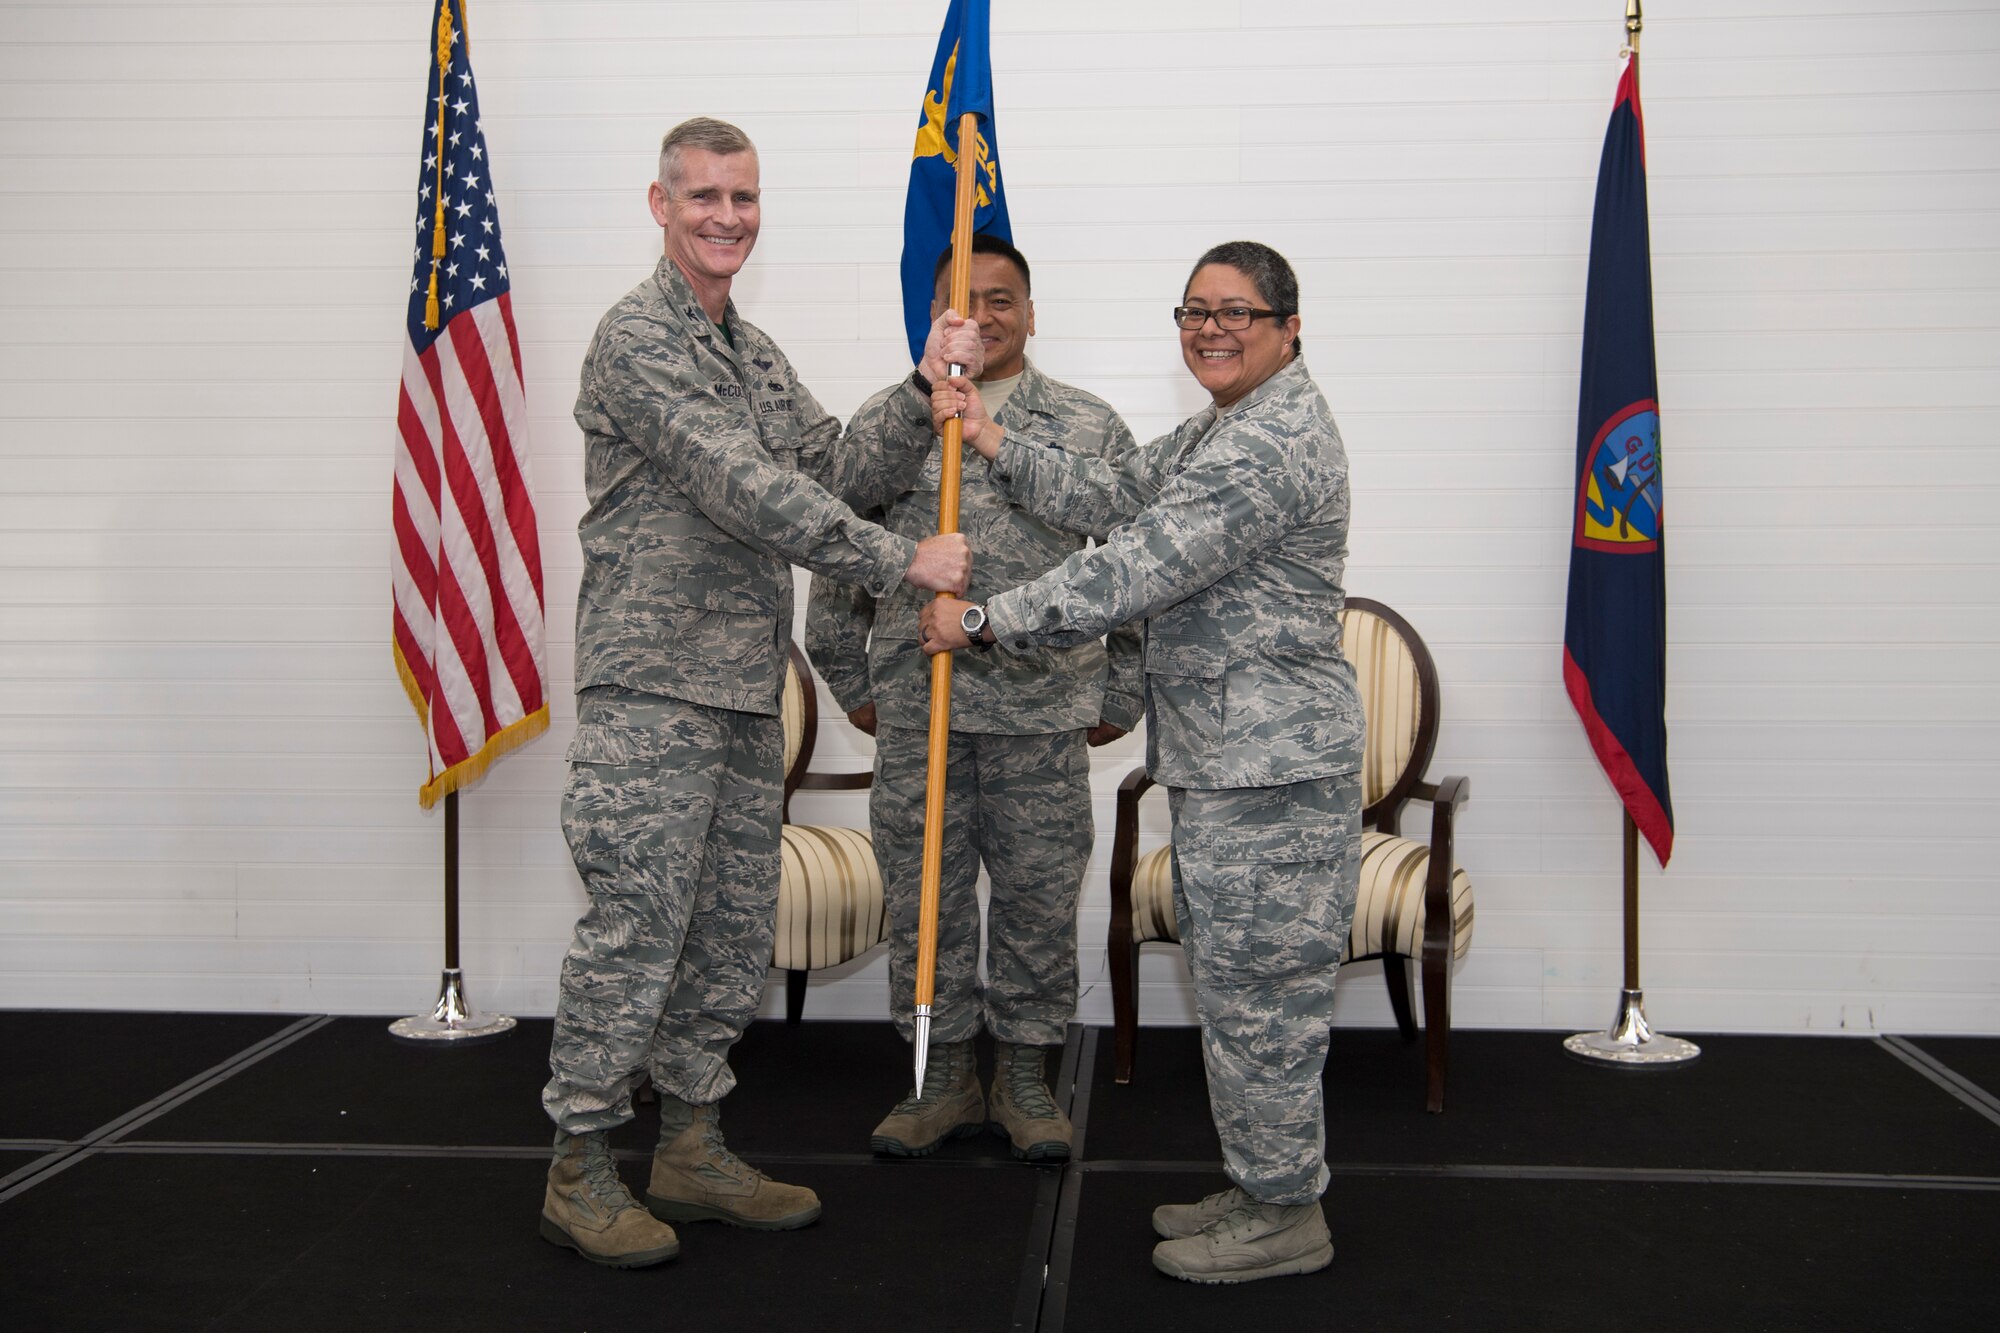 U.S. Air Force Col. Brian McCullagh, 624th Regional Support Group commander, gives Lt. Col. Carla Lugo command of the 44th Aerial Port Squadron during an assumption of command ceremony at Andersen Air Force Base, Guam, June 2, 2018.